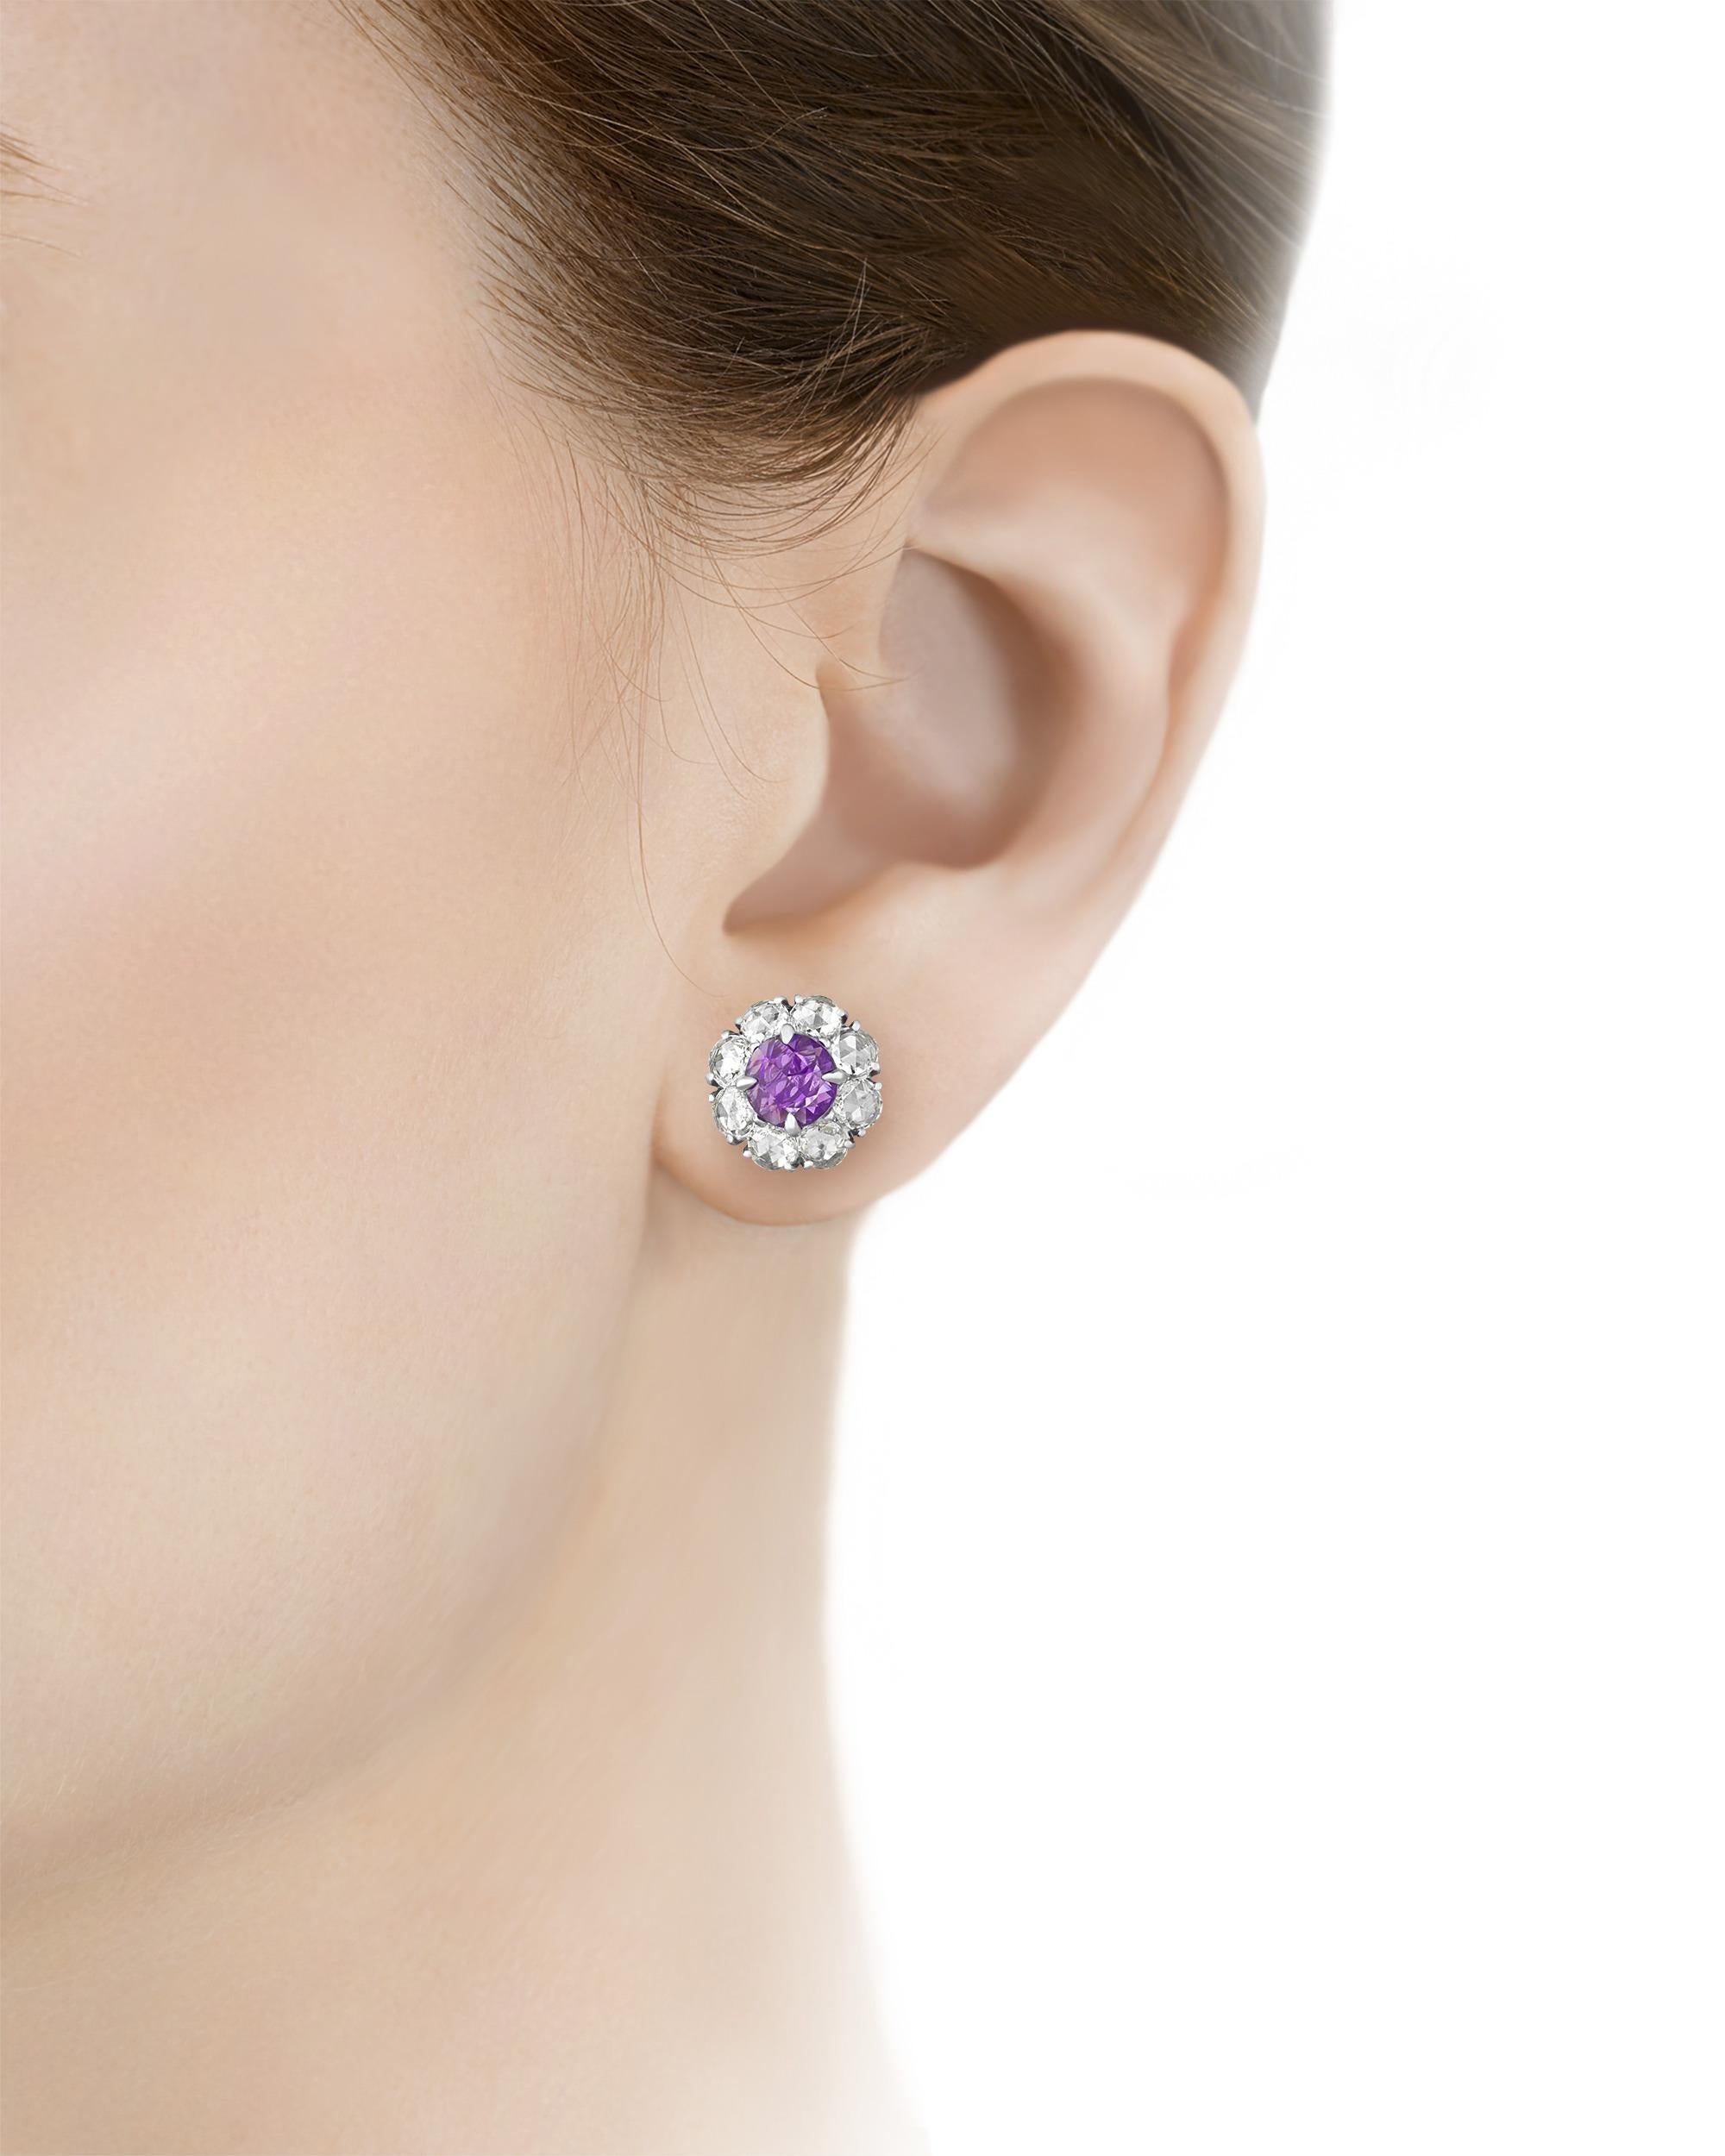 Round Cut Madagascar Sapphire Earrings, 2.42 Carats For Sale